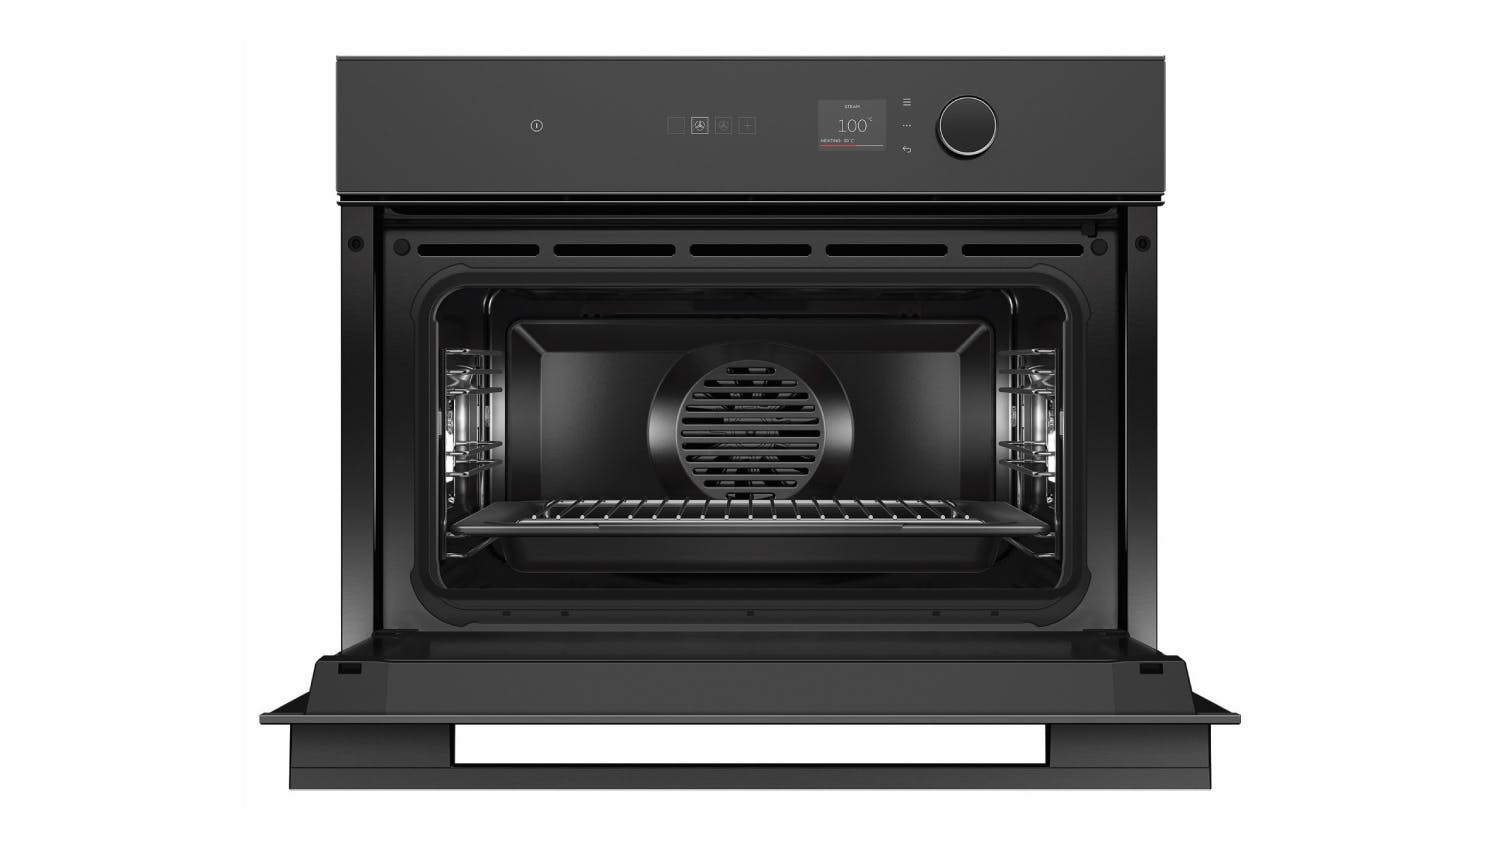 Fisher & Paykel 60cm 18 Function Built-In Compact Steam Oven - Black Glass (Series 7/OS60NMLB1)